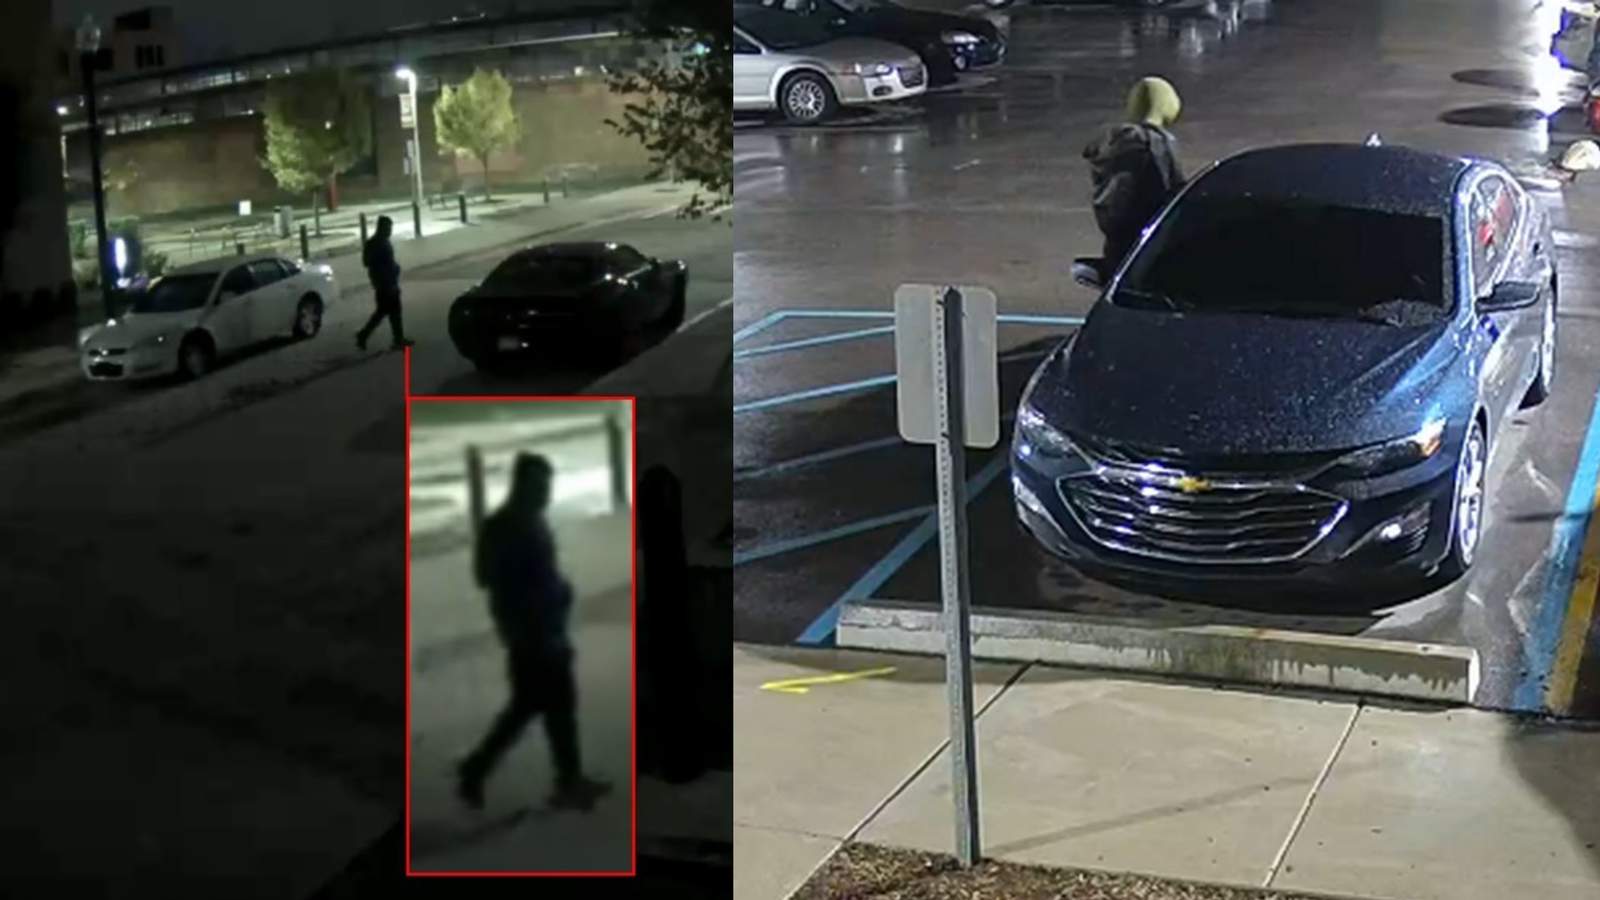 Police search for 2 suspects accused of stealing from vehicles on Detroit’s east side